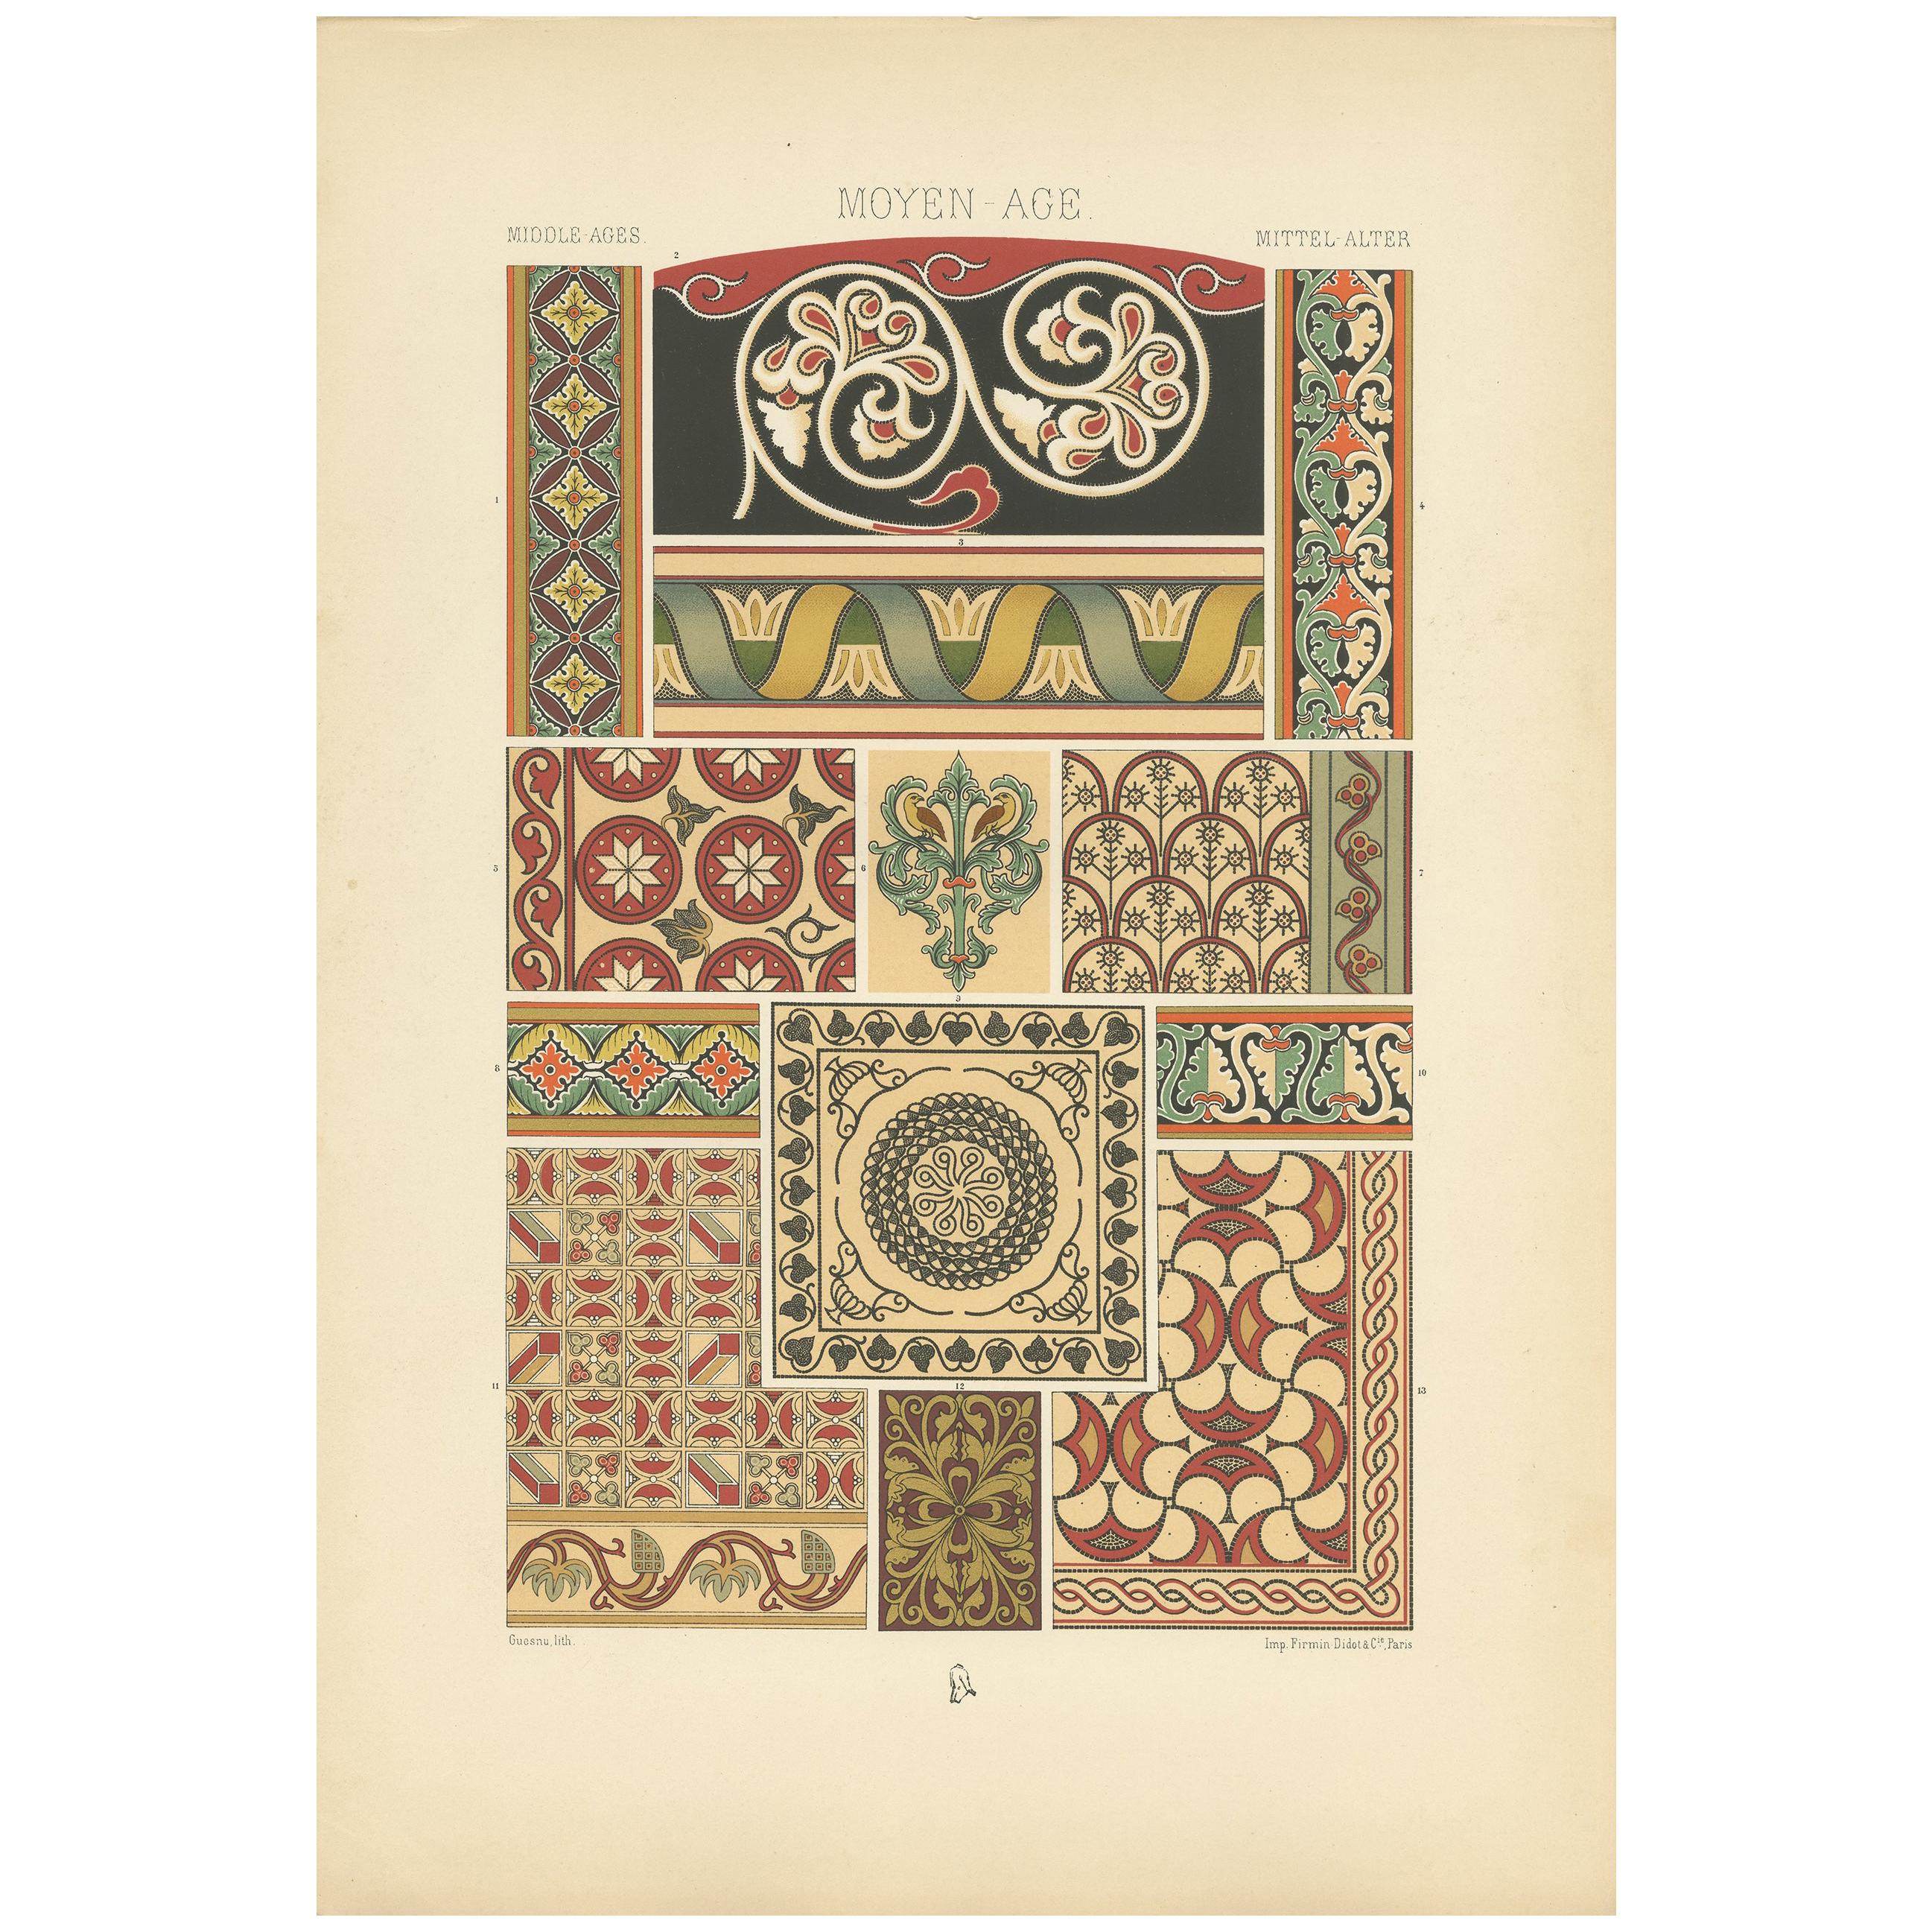 Pl. 46 Antique Print of Mosaic and Painted Ornament by Racinet, circa 1890